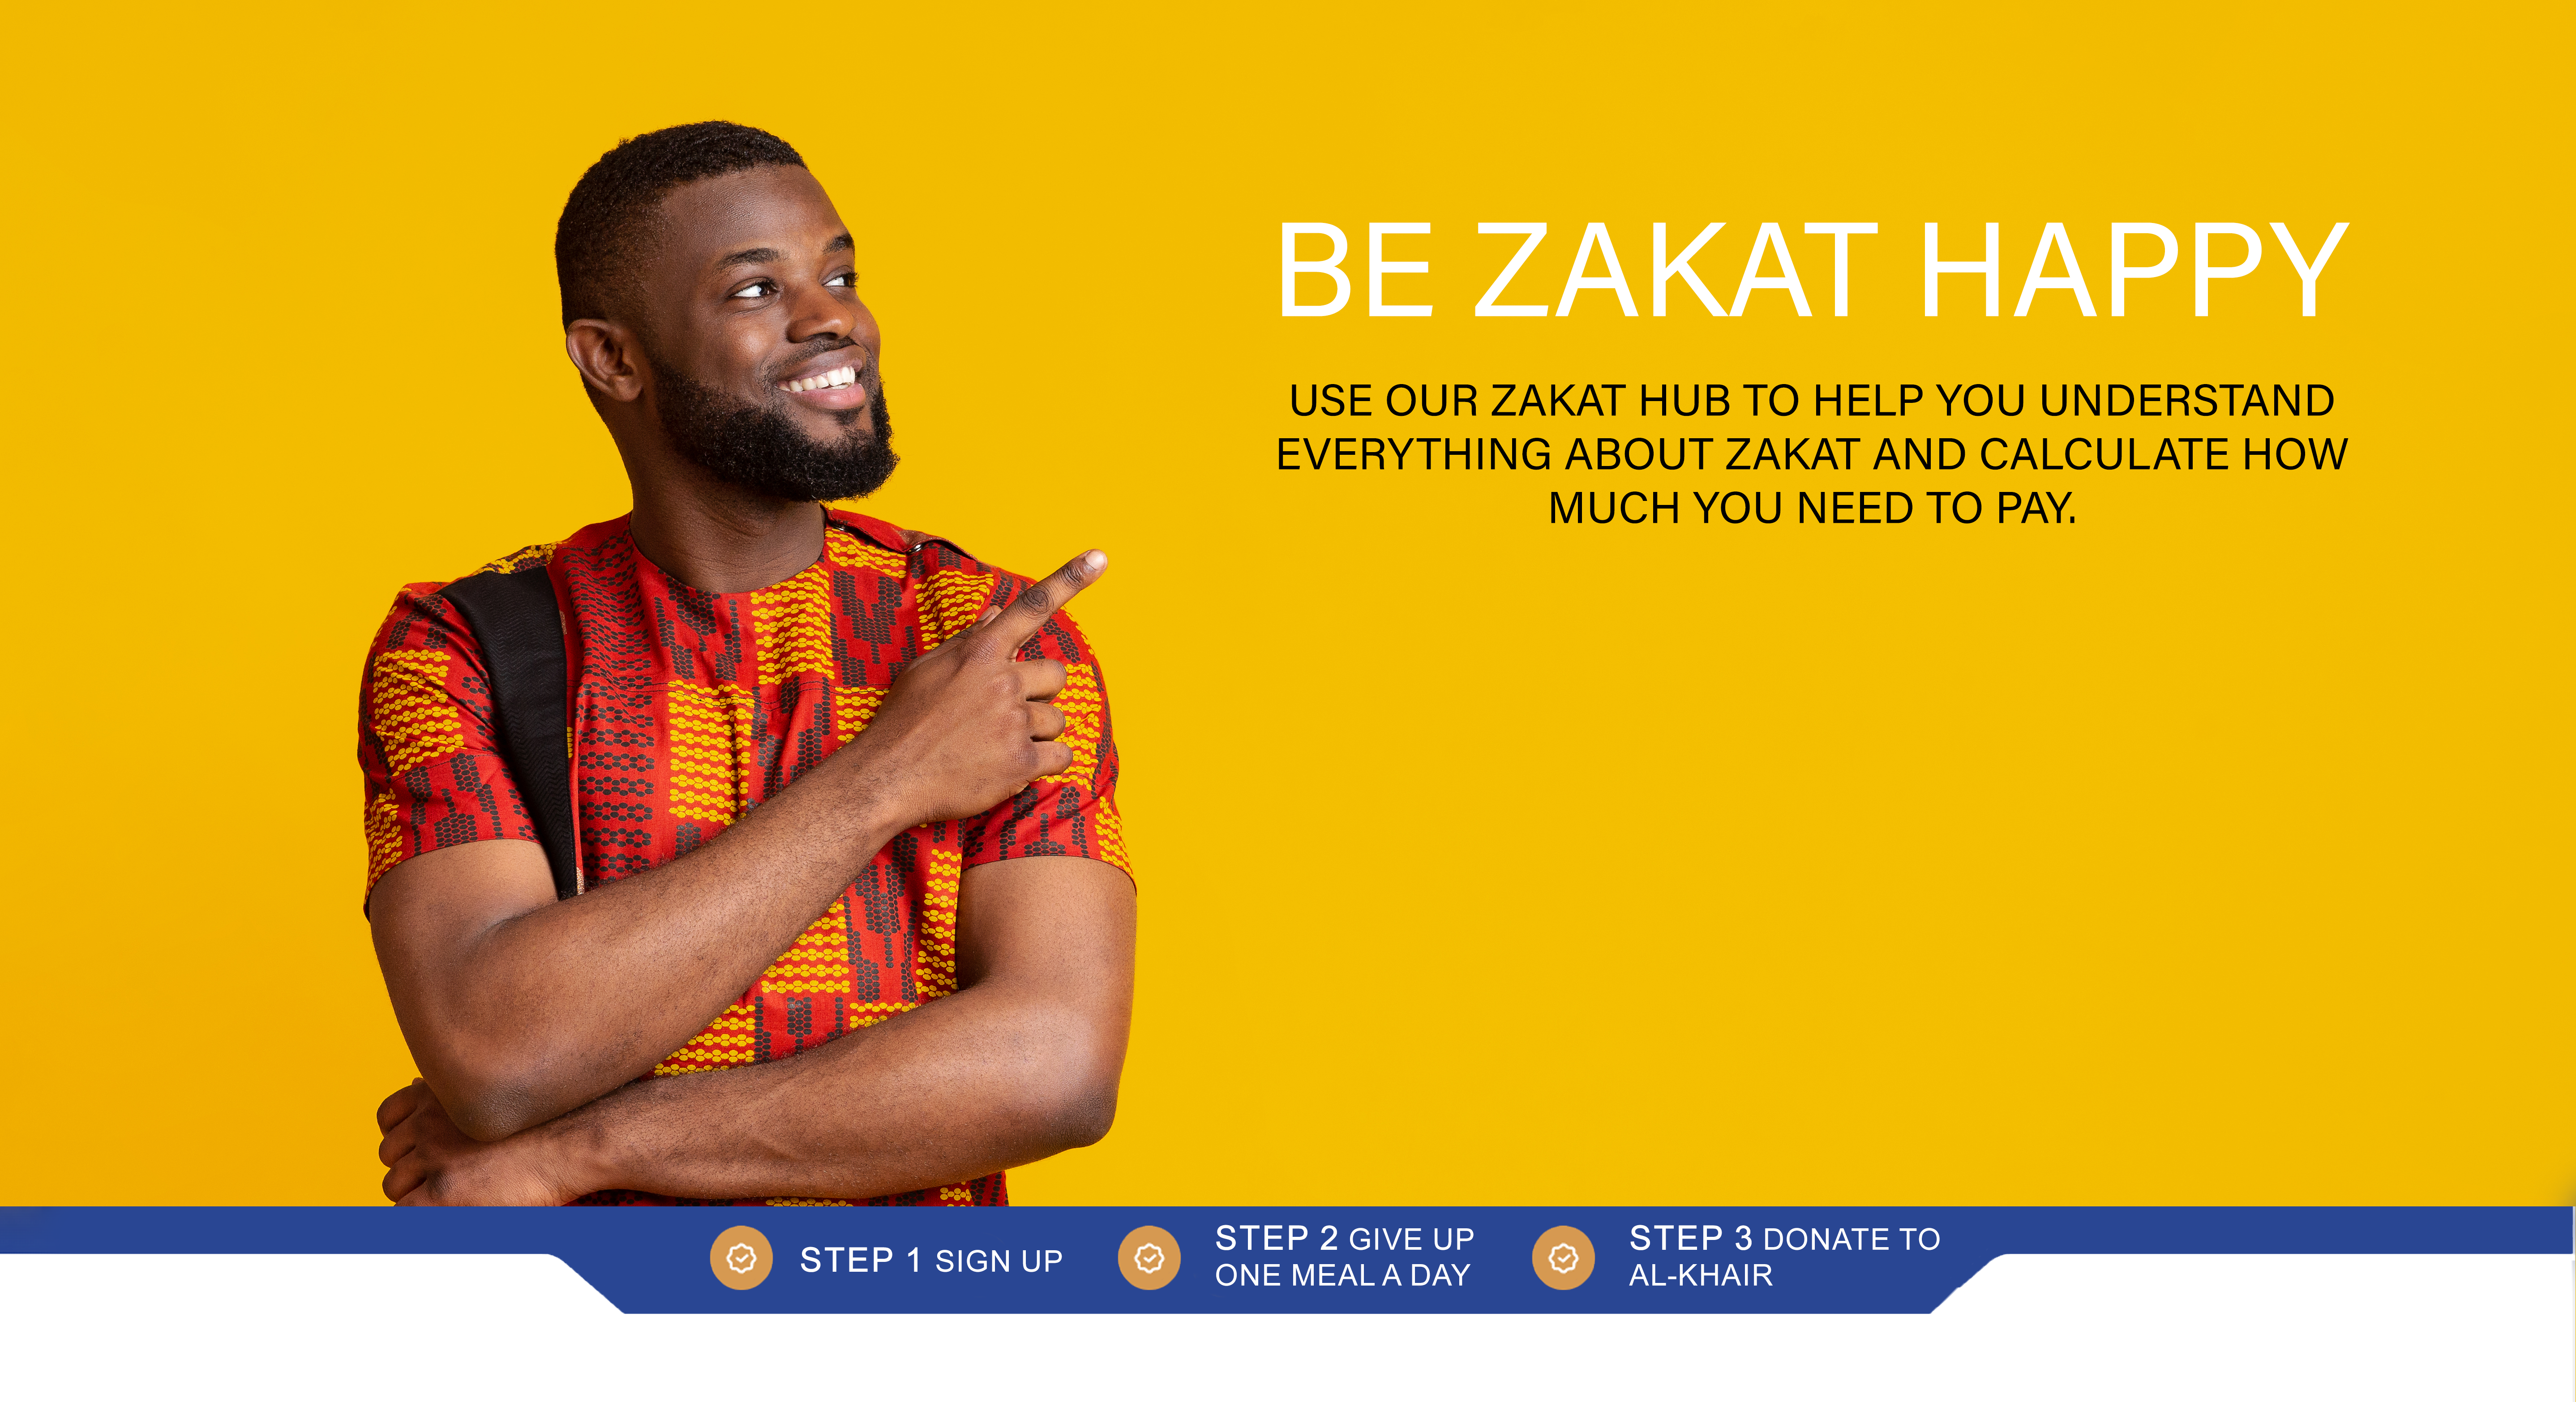 WELCOME TO OUR ZAKAT HUB